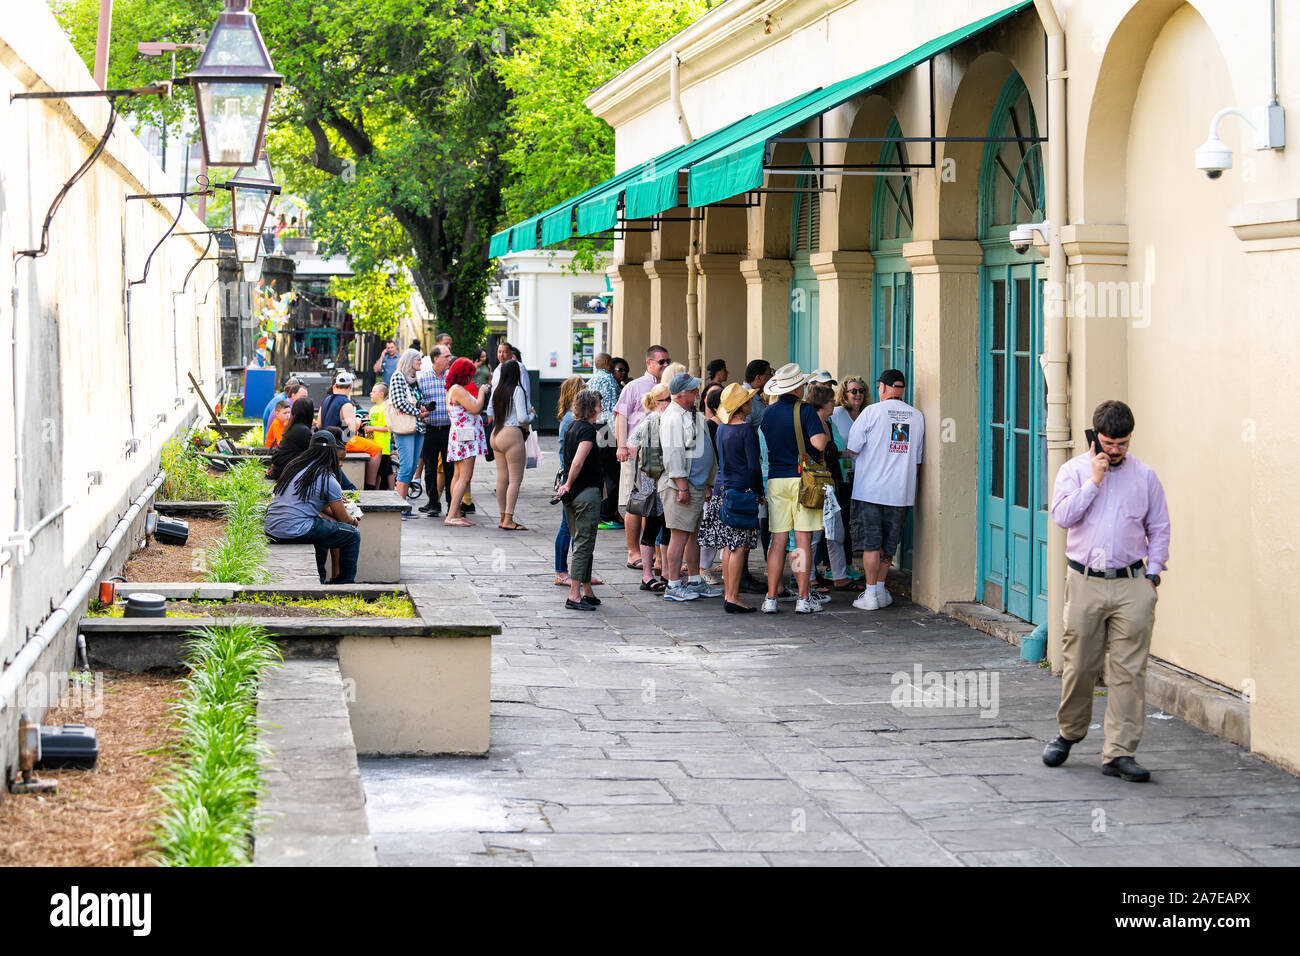 New Orleans, USA - April 23, 2018: People in line queue waiting to order food at Cafe Du Monde restaurant sign famous for beignet donuts and chicory c Stock Photo